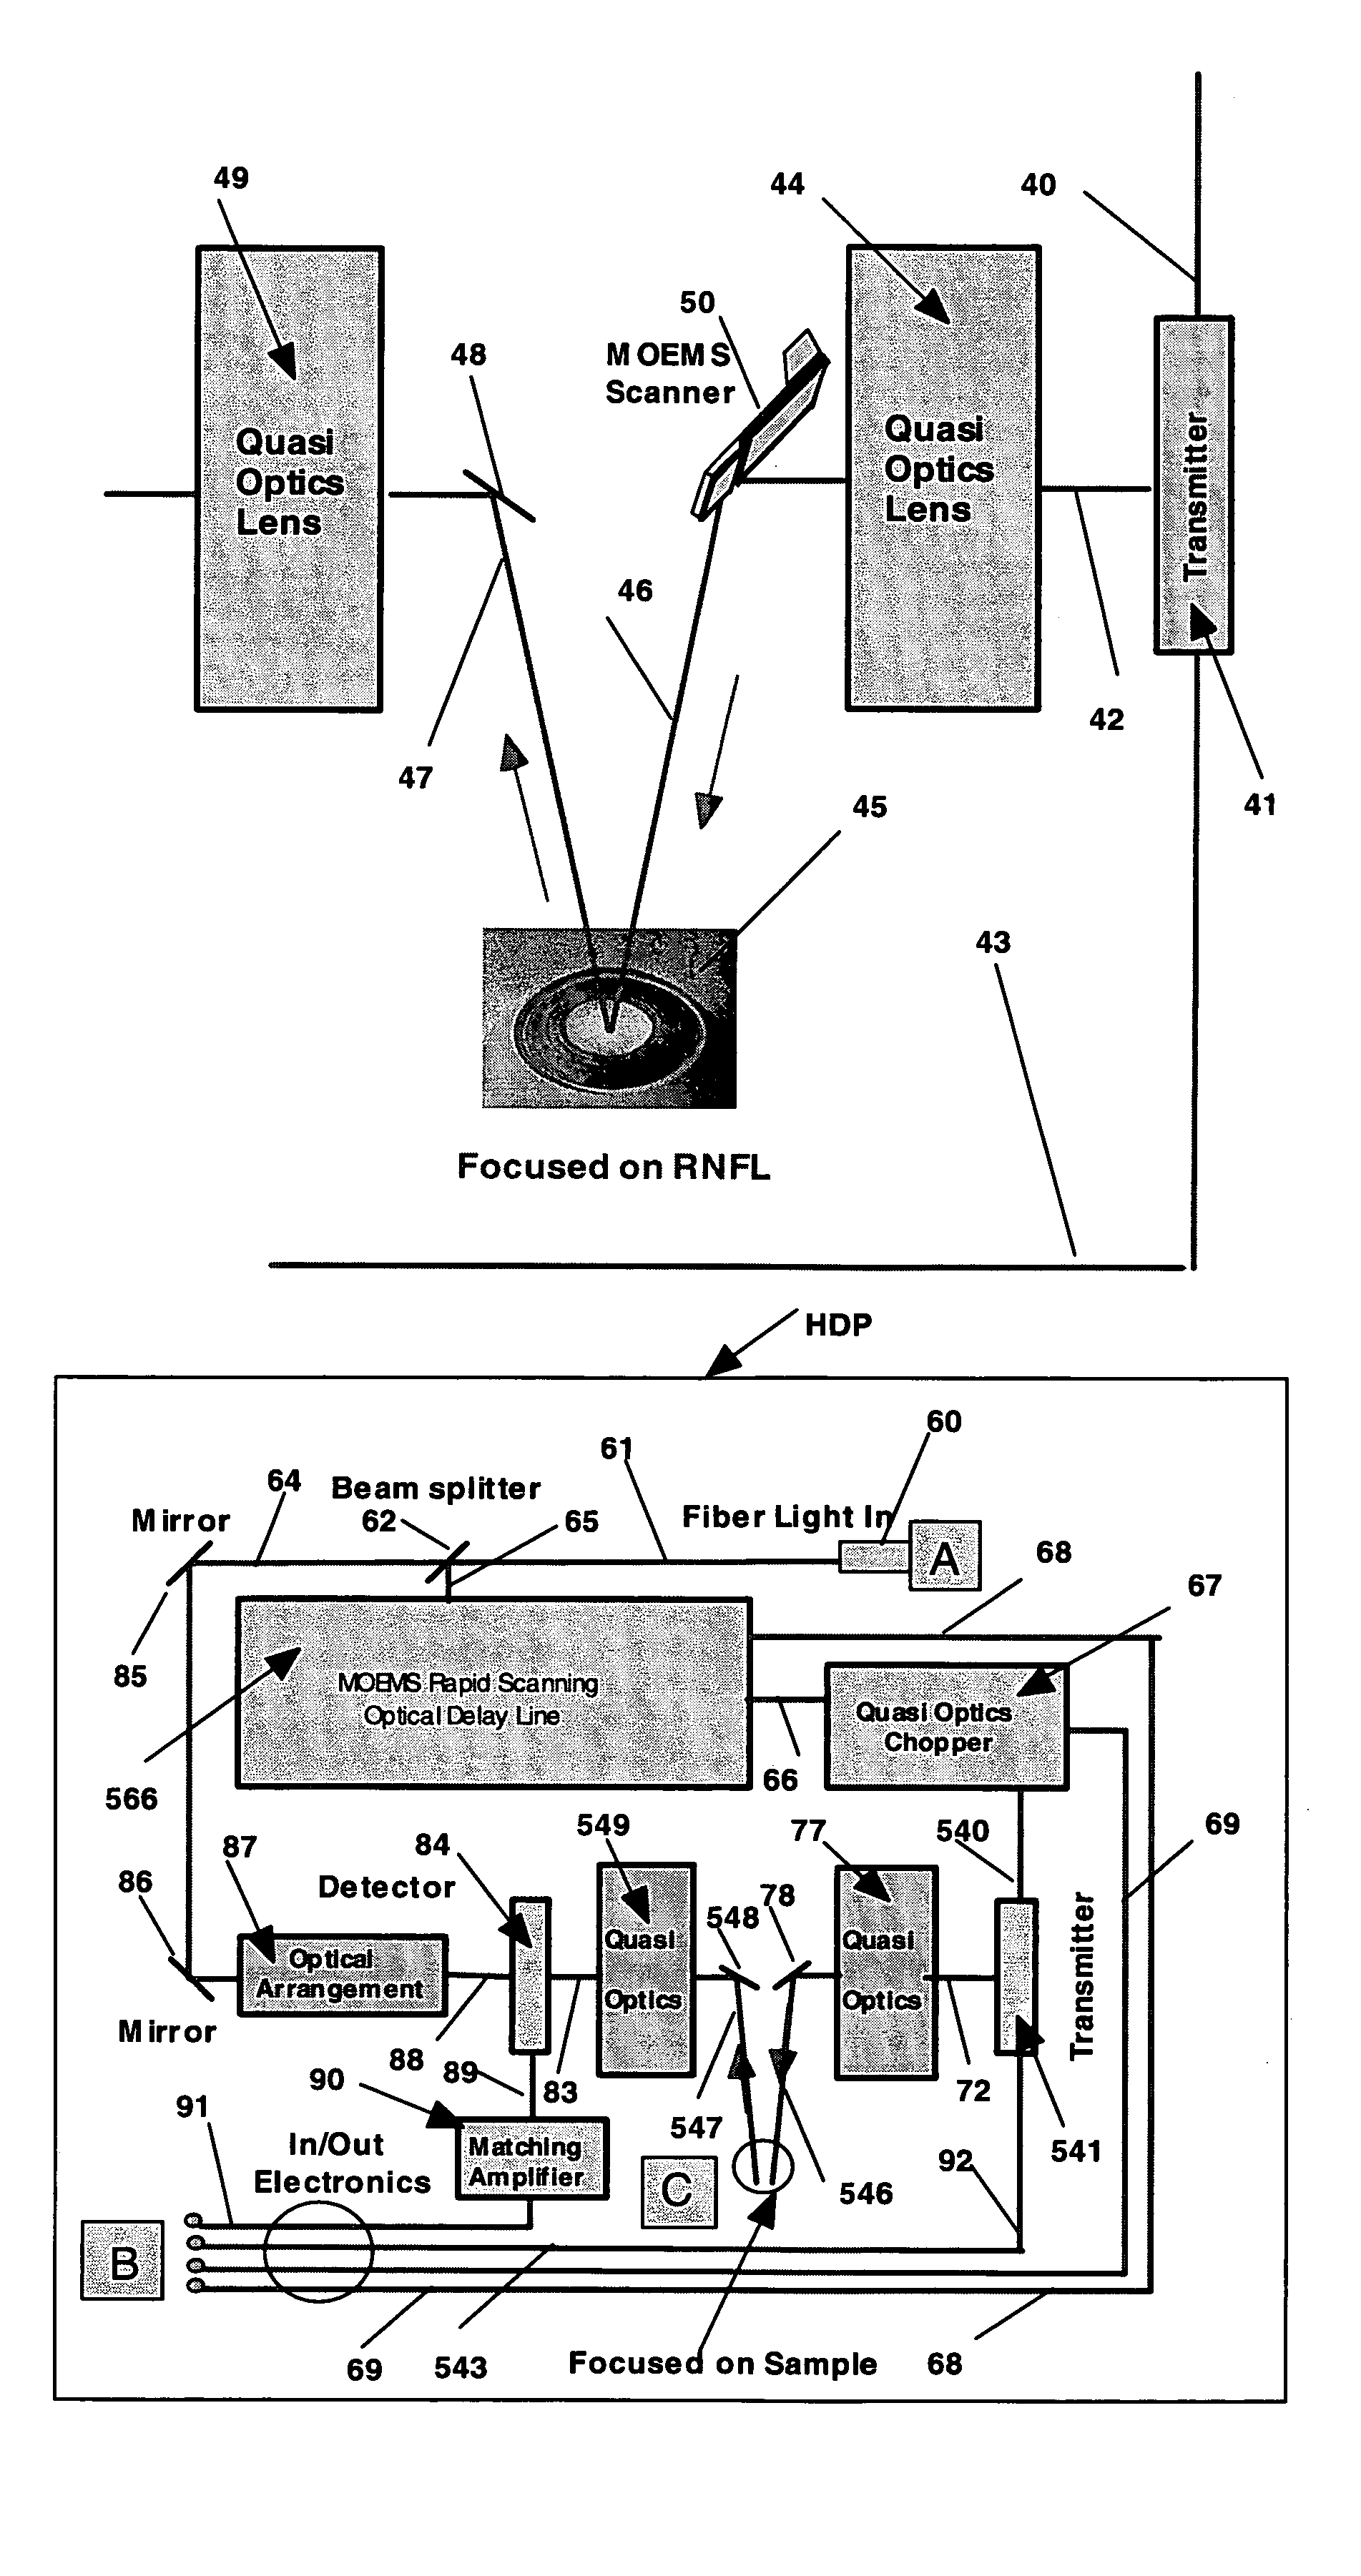 Method and apparatus for early diagnosis of Alzheimer's using non-invasive eye tomography by terahertz